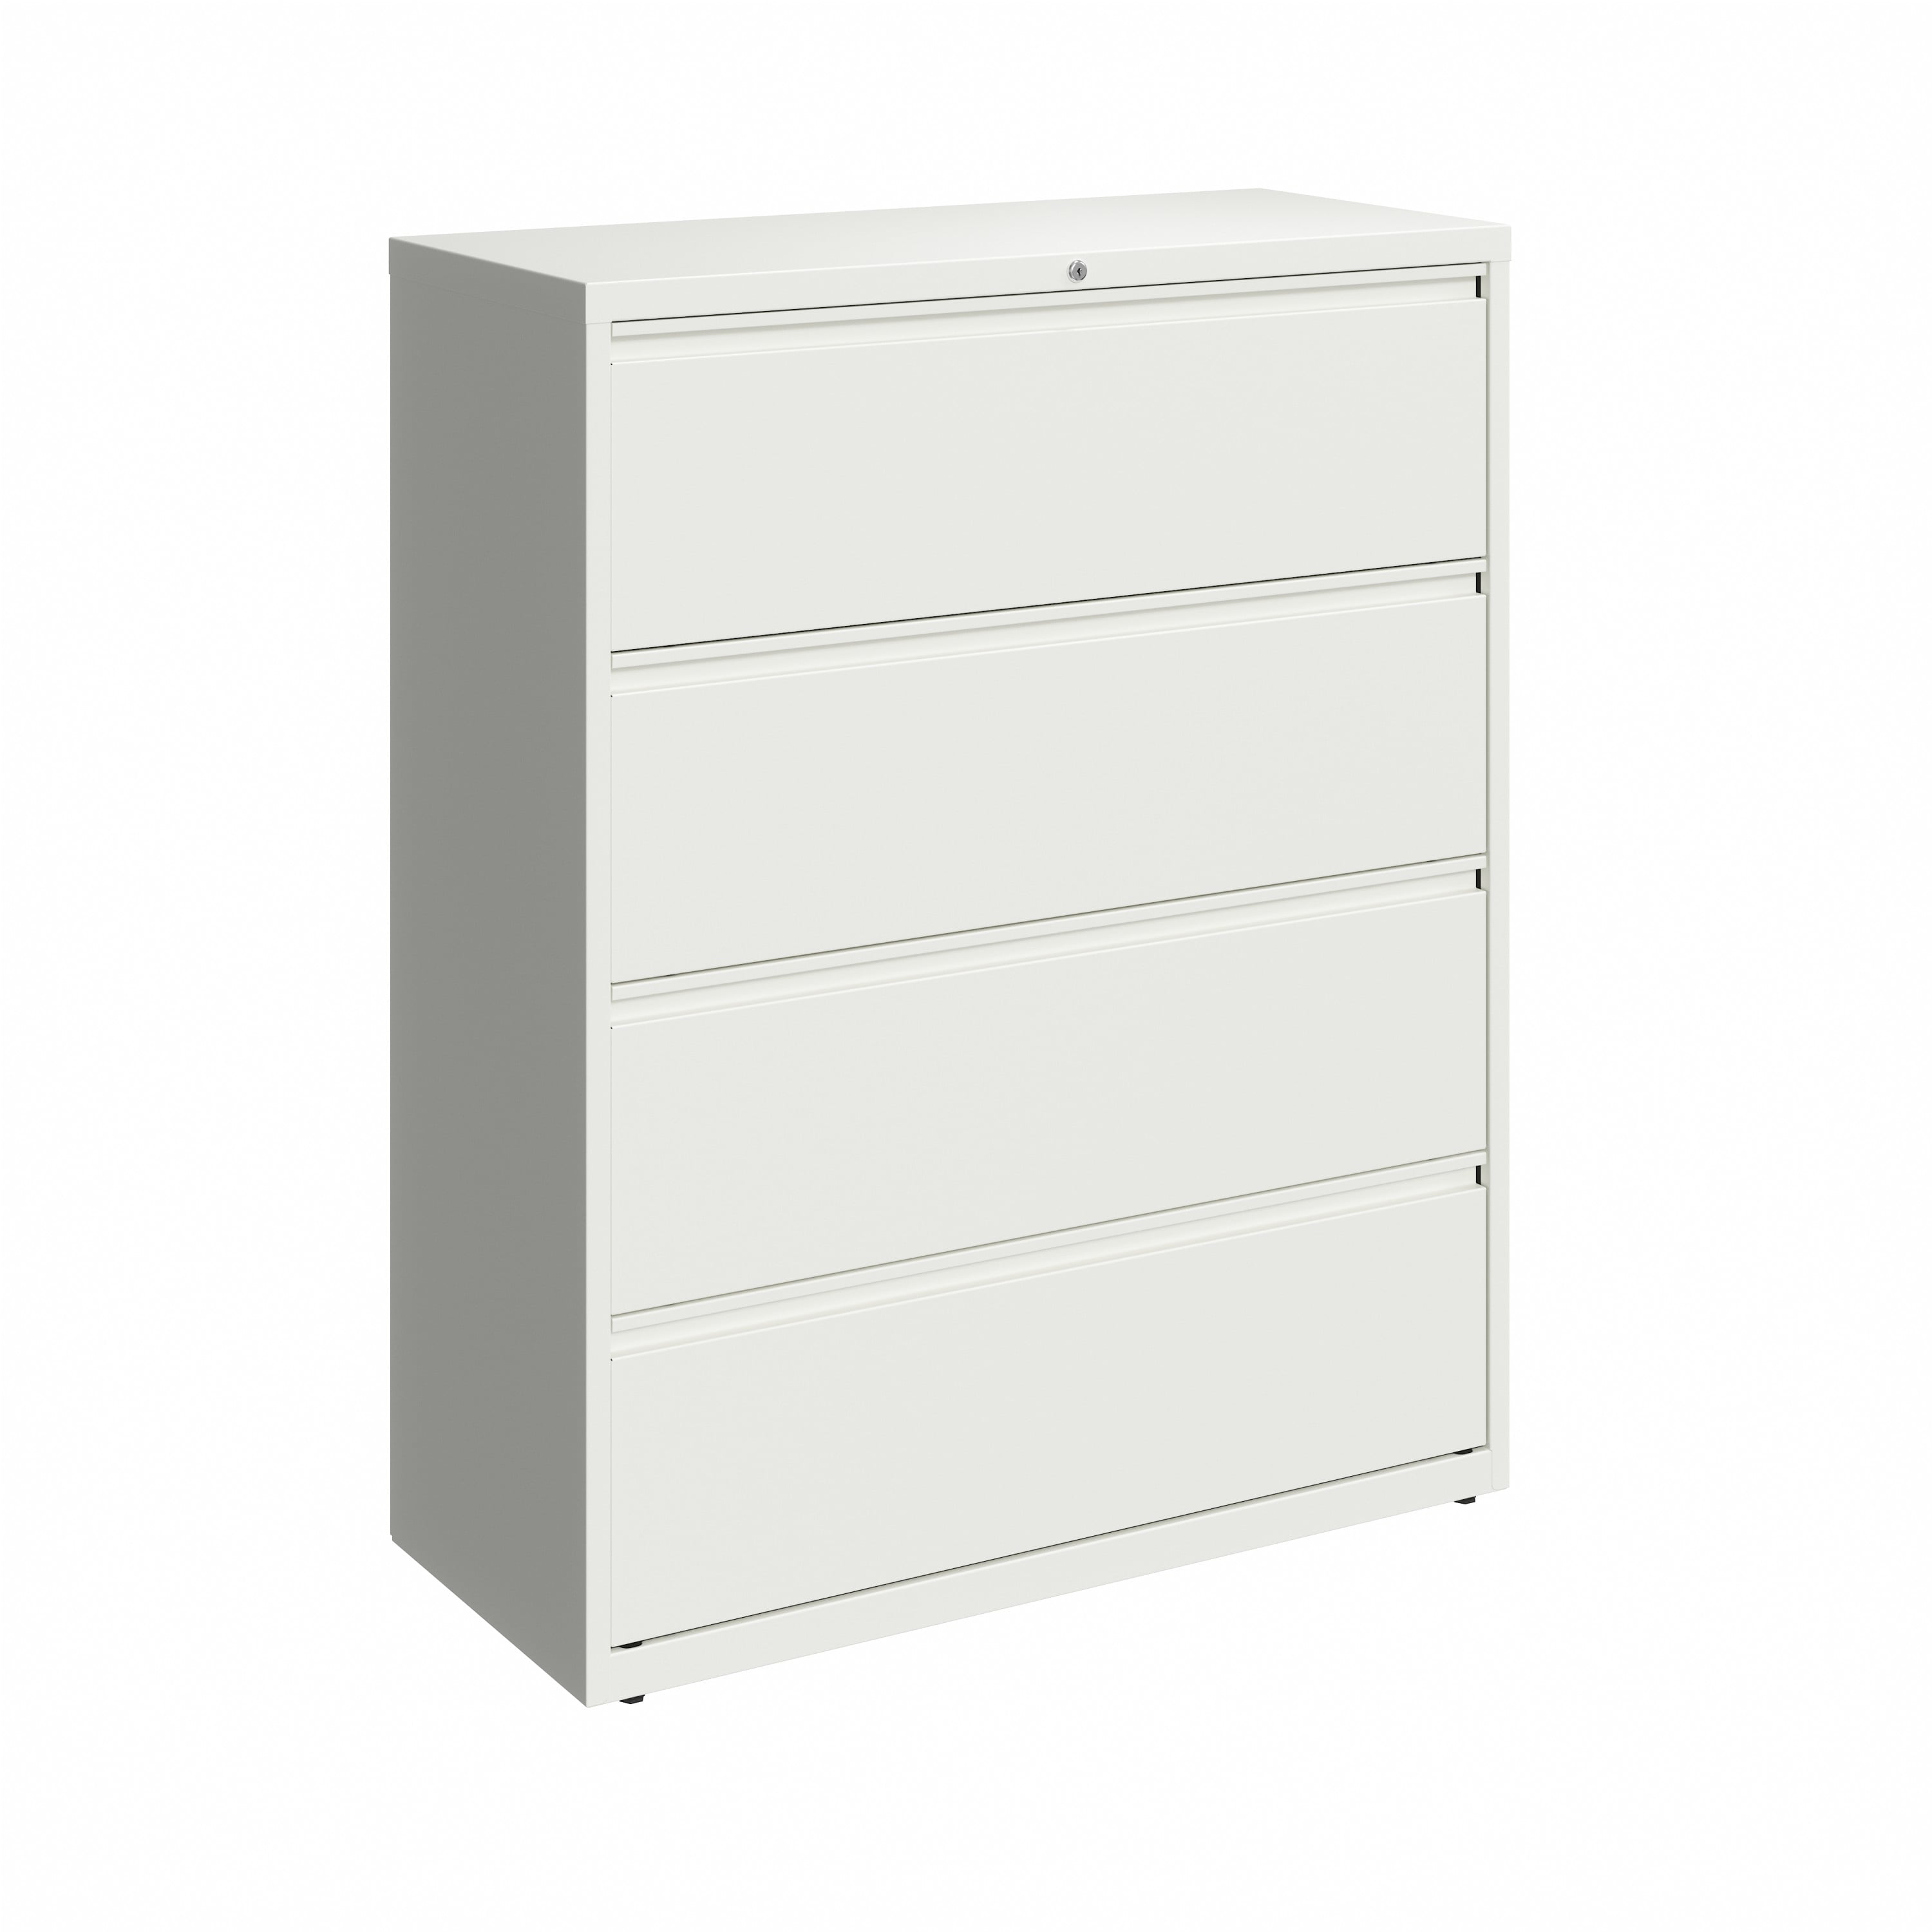 4 DRAWER * key & local delivery available LATERAL FILE CABINETS 